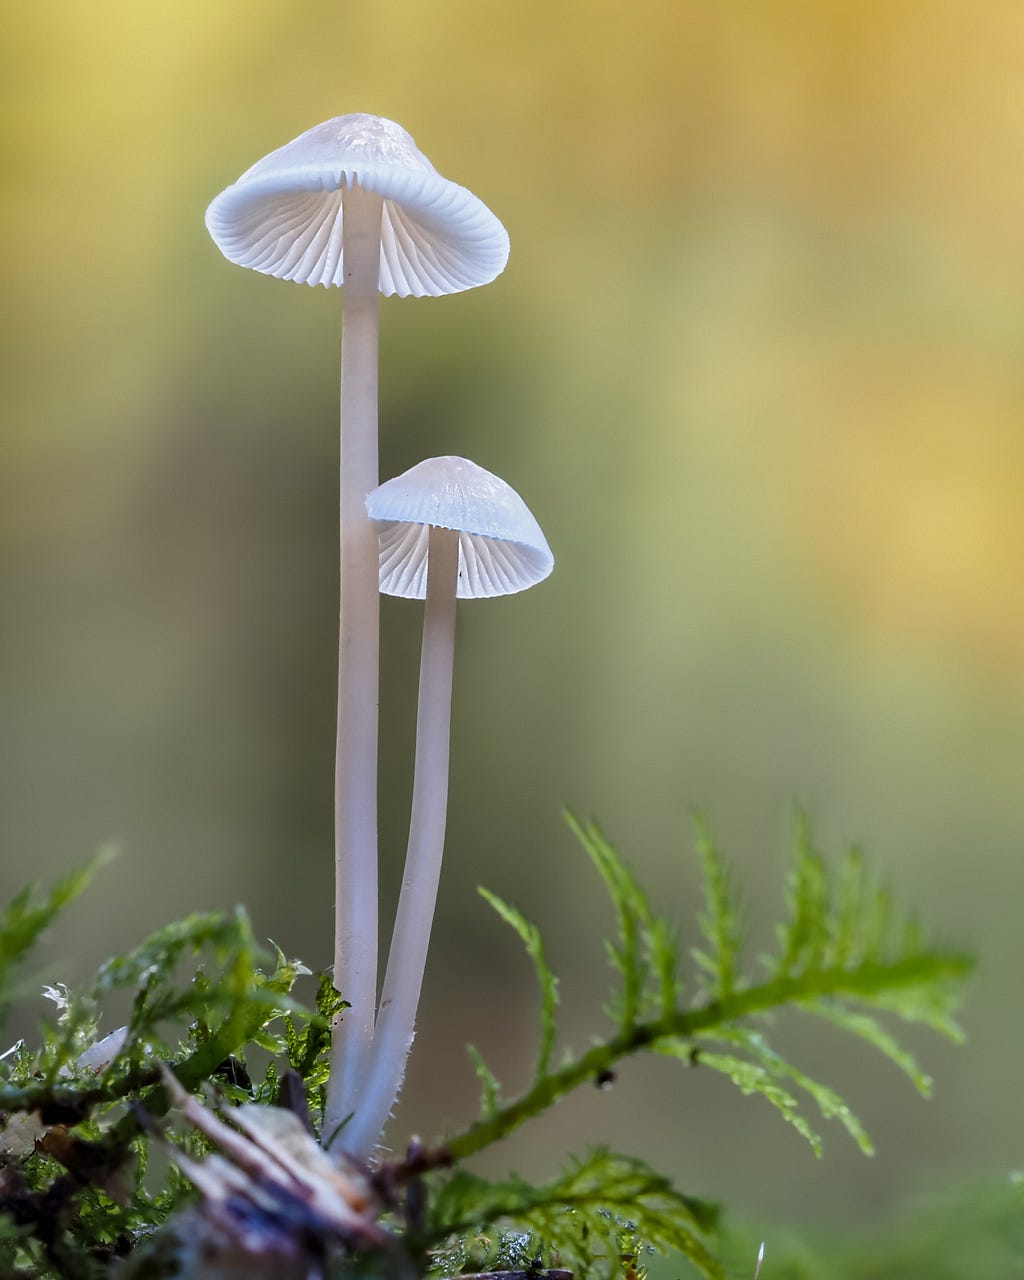 Two white mushrooms growing on a branch, one taller than the other